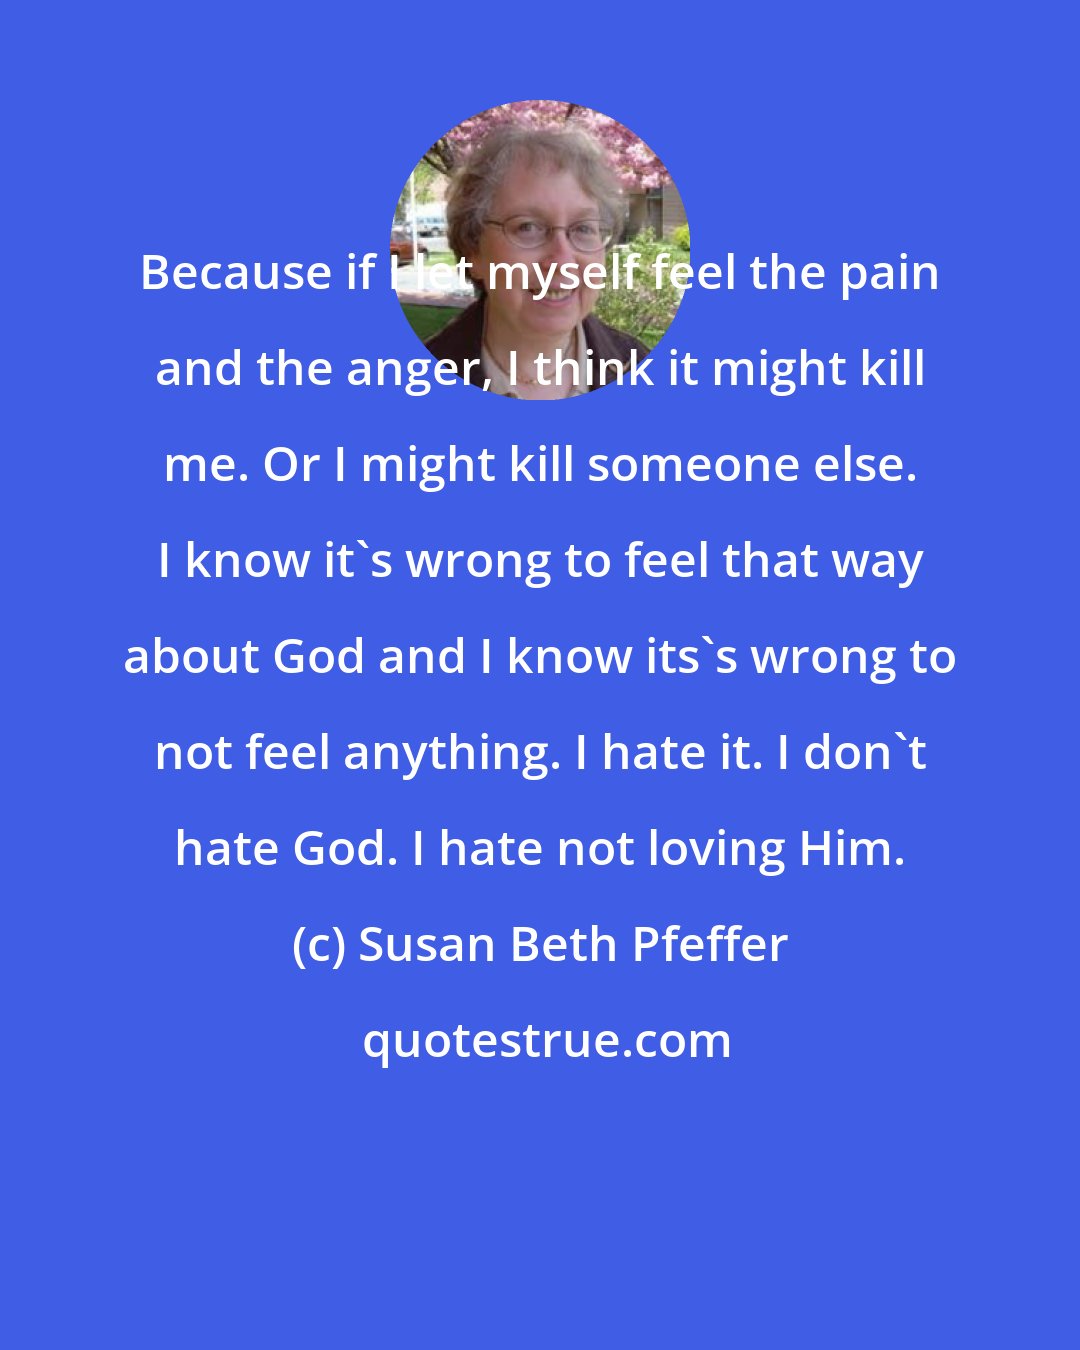 Susan Beth Pfeffer: Because if I let myself feel the pain and the anger, I think it might kill me. Or I might kill someone else. I know it's wrong to feel that way about God and I know its's wrong to not feel anything. I hate it. I don't hate God. I hate not loving Him.